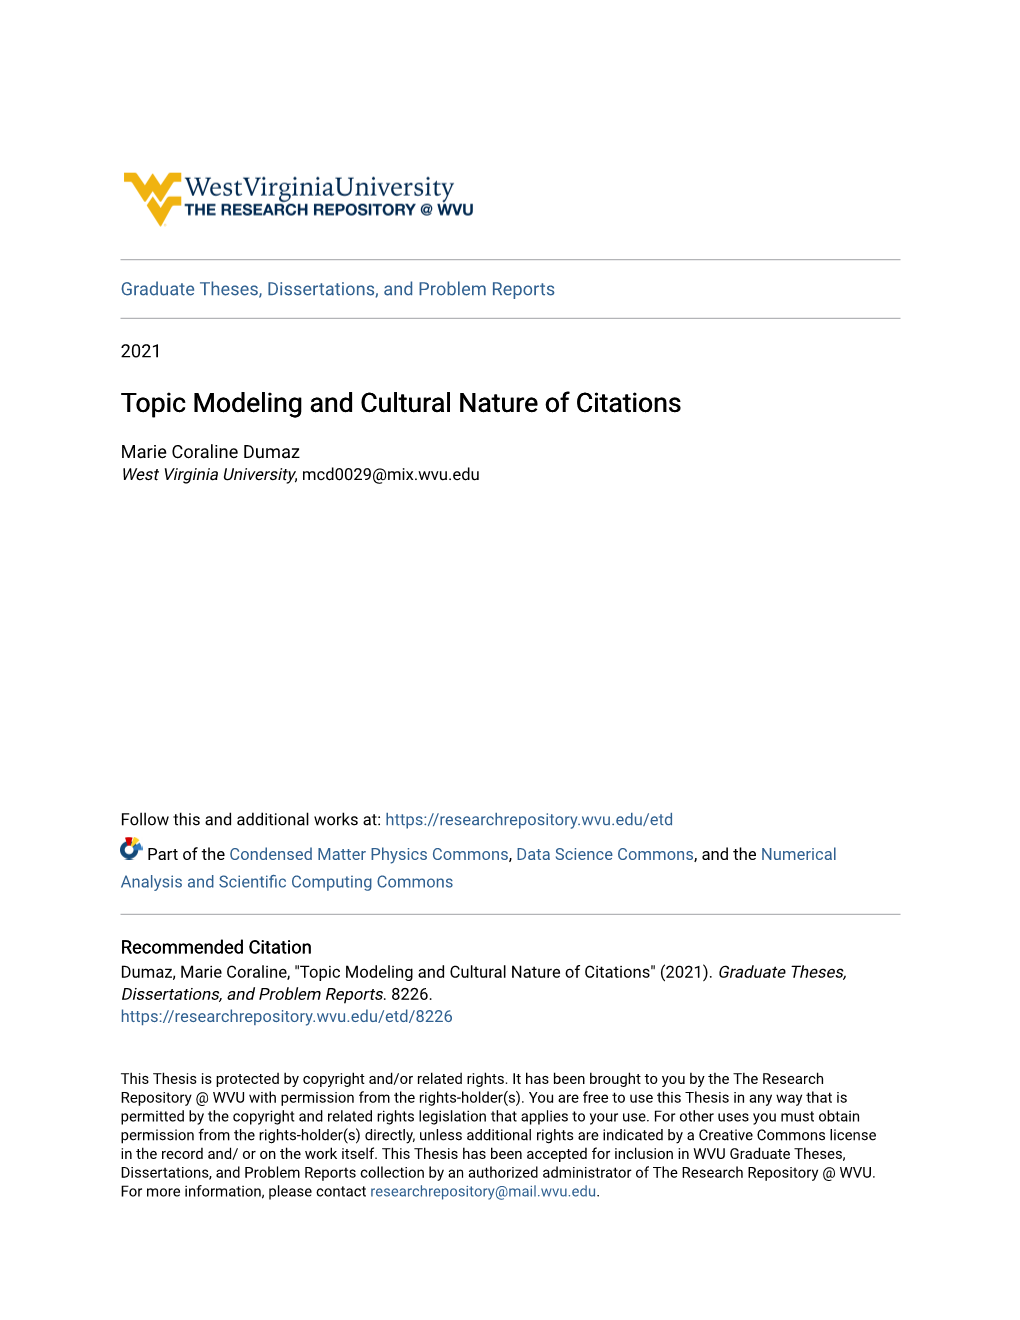 Topic Modeling and Cultural Nature of Citations